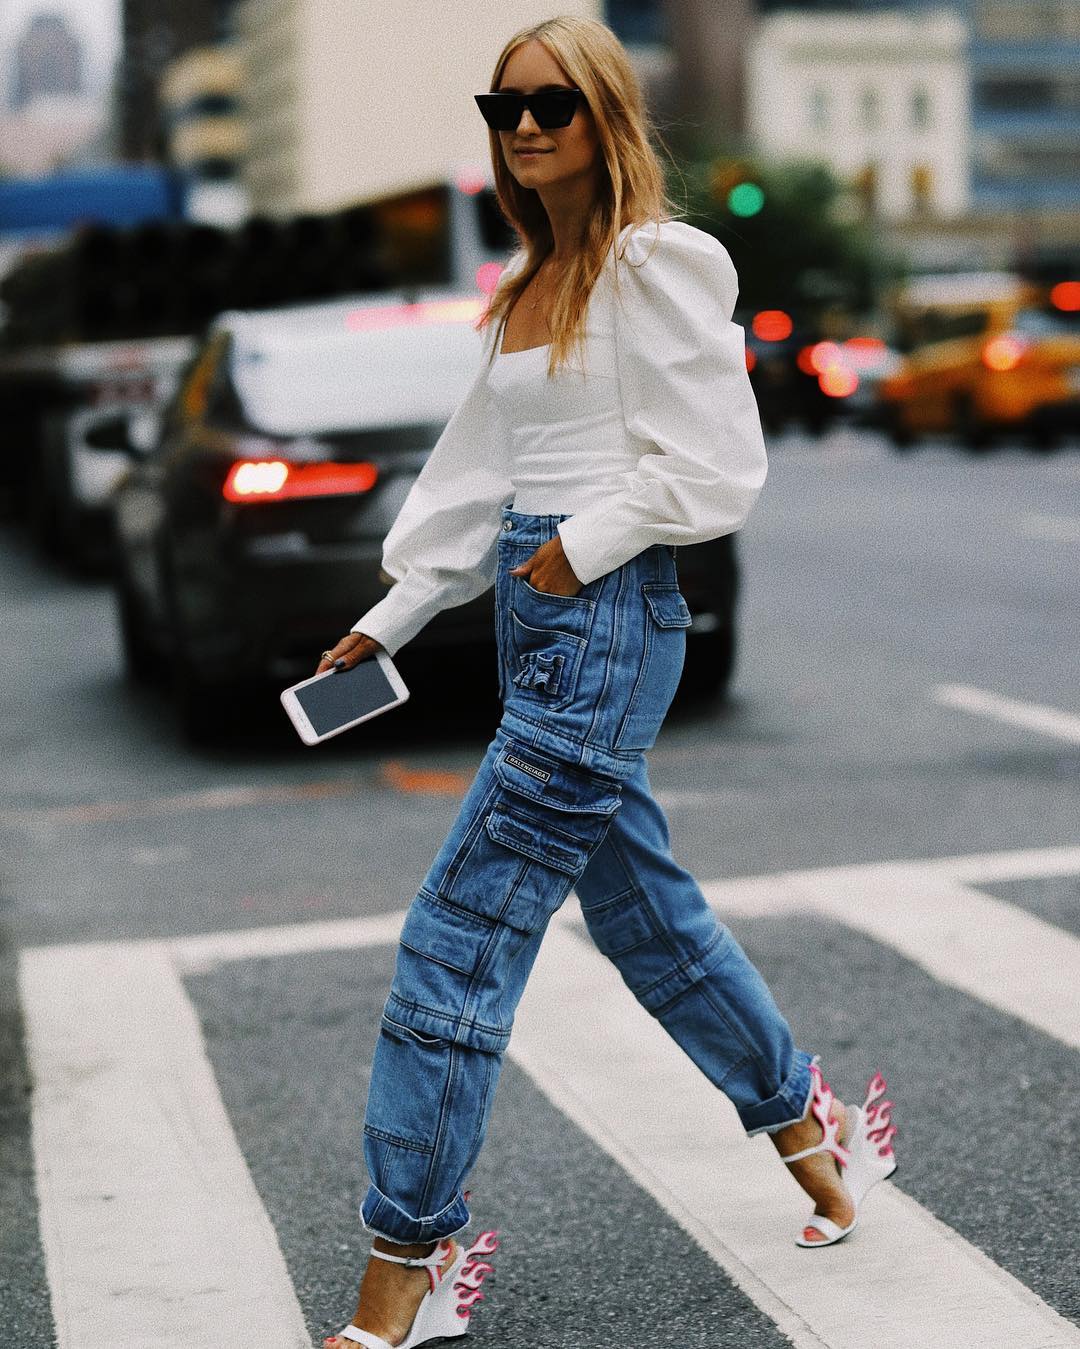 The New | Trends Now Who Right Jean Is in What NYC Everyone Wearing Wear